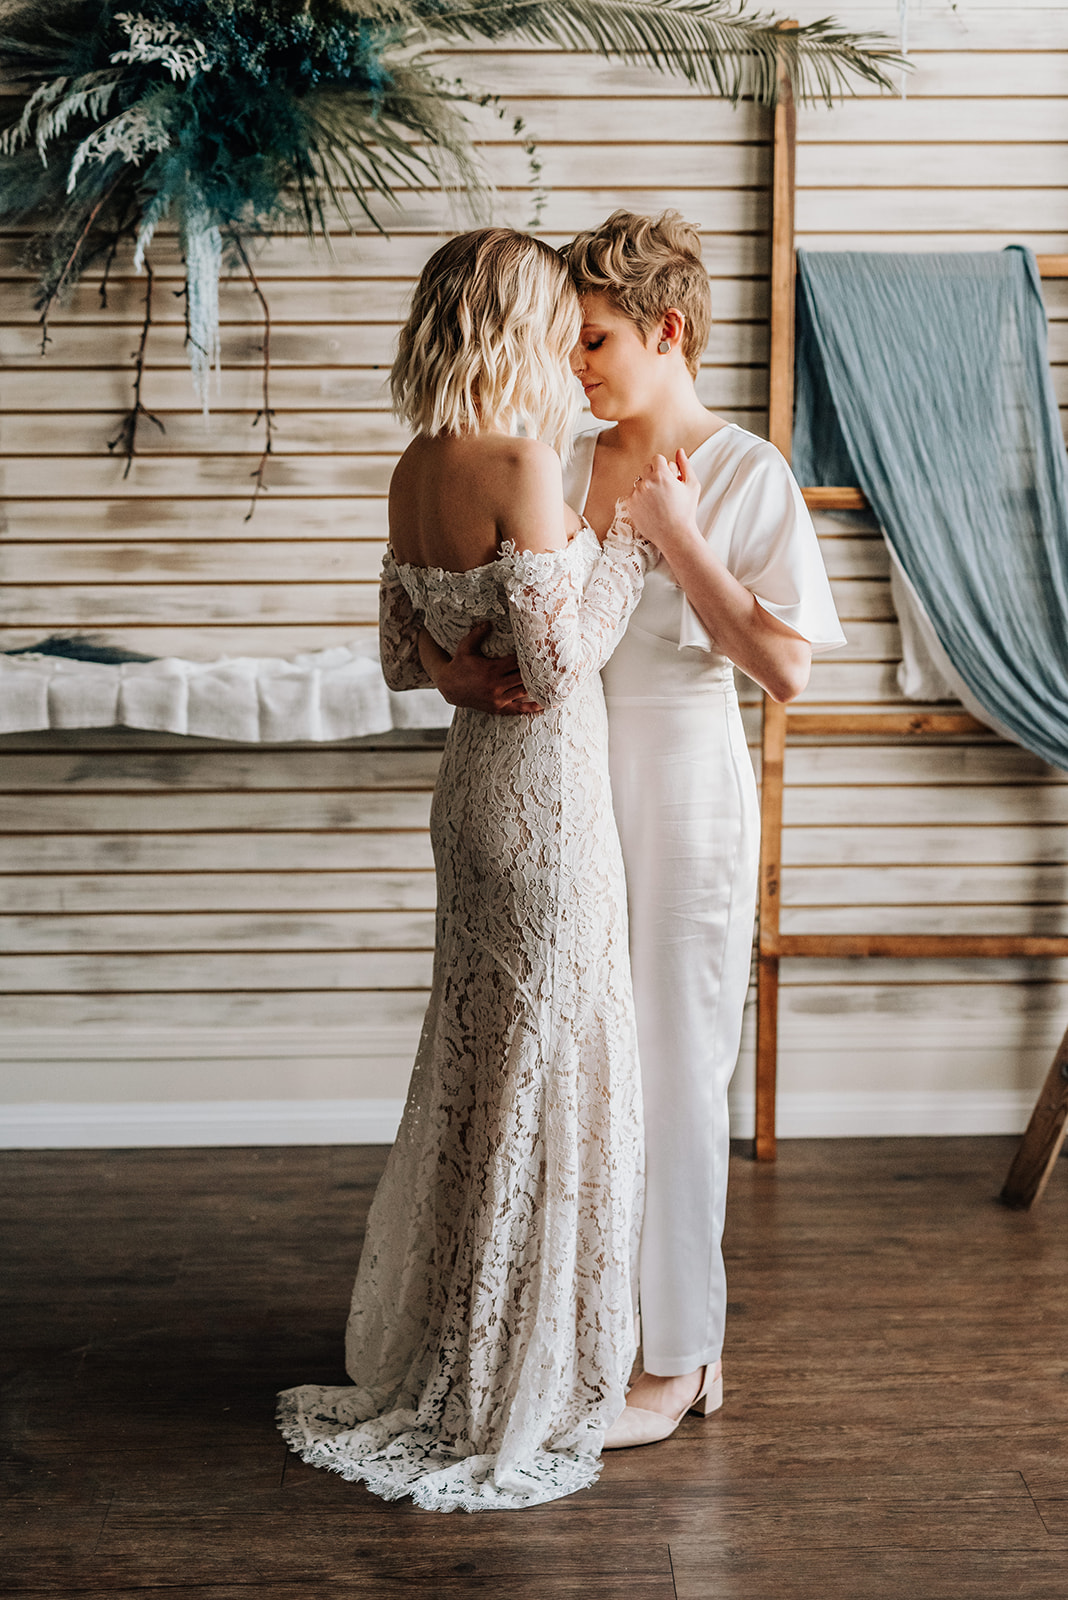 Brides share their first dance in a hair salon decorated for a bohemian elopement 